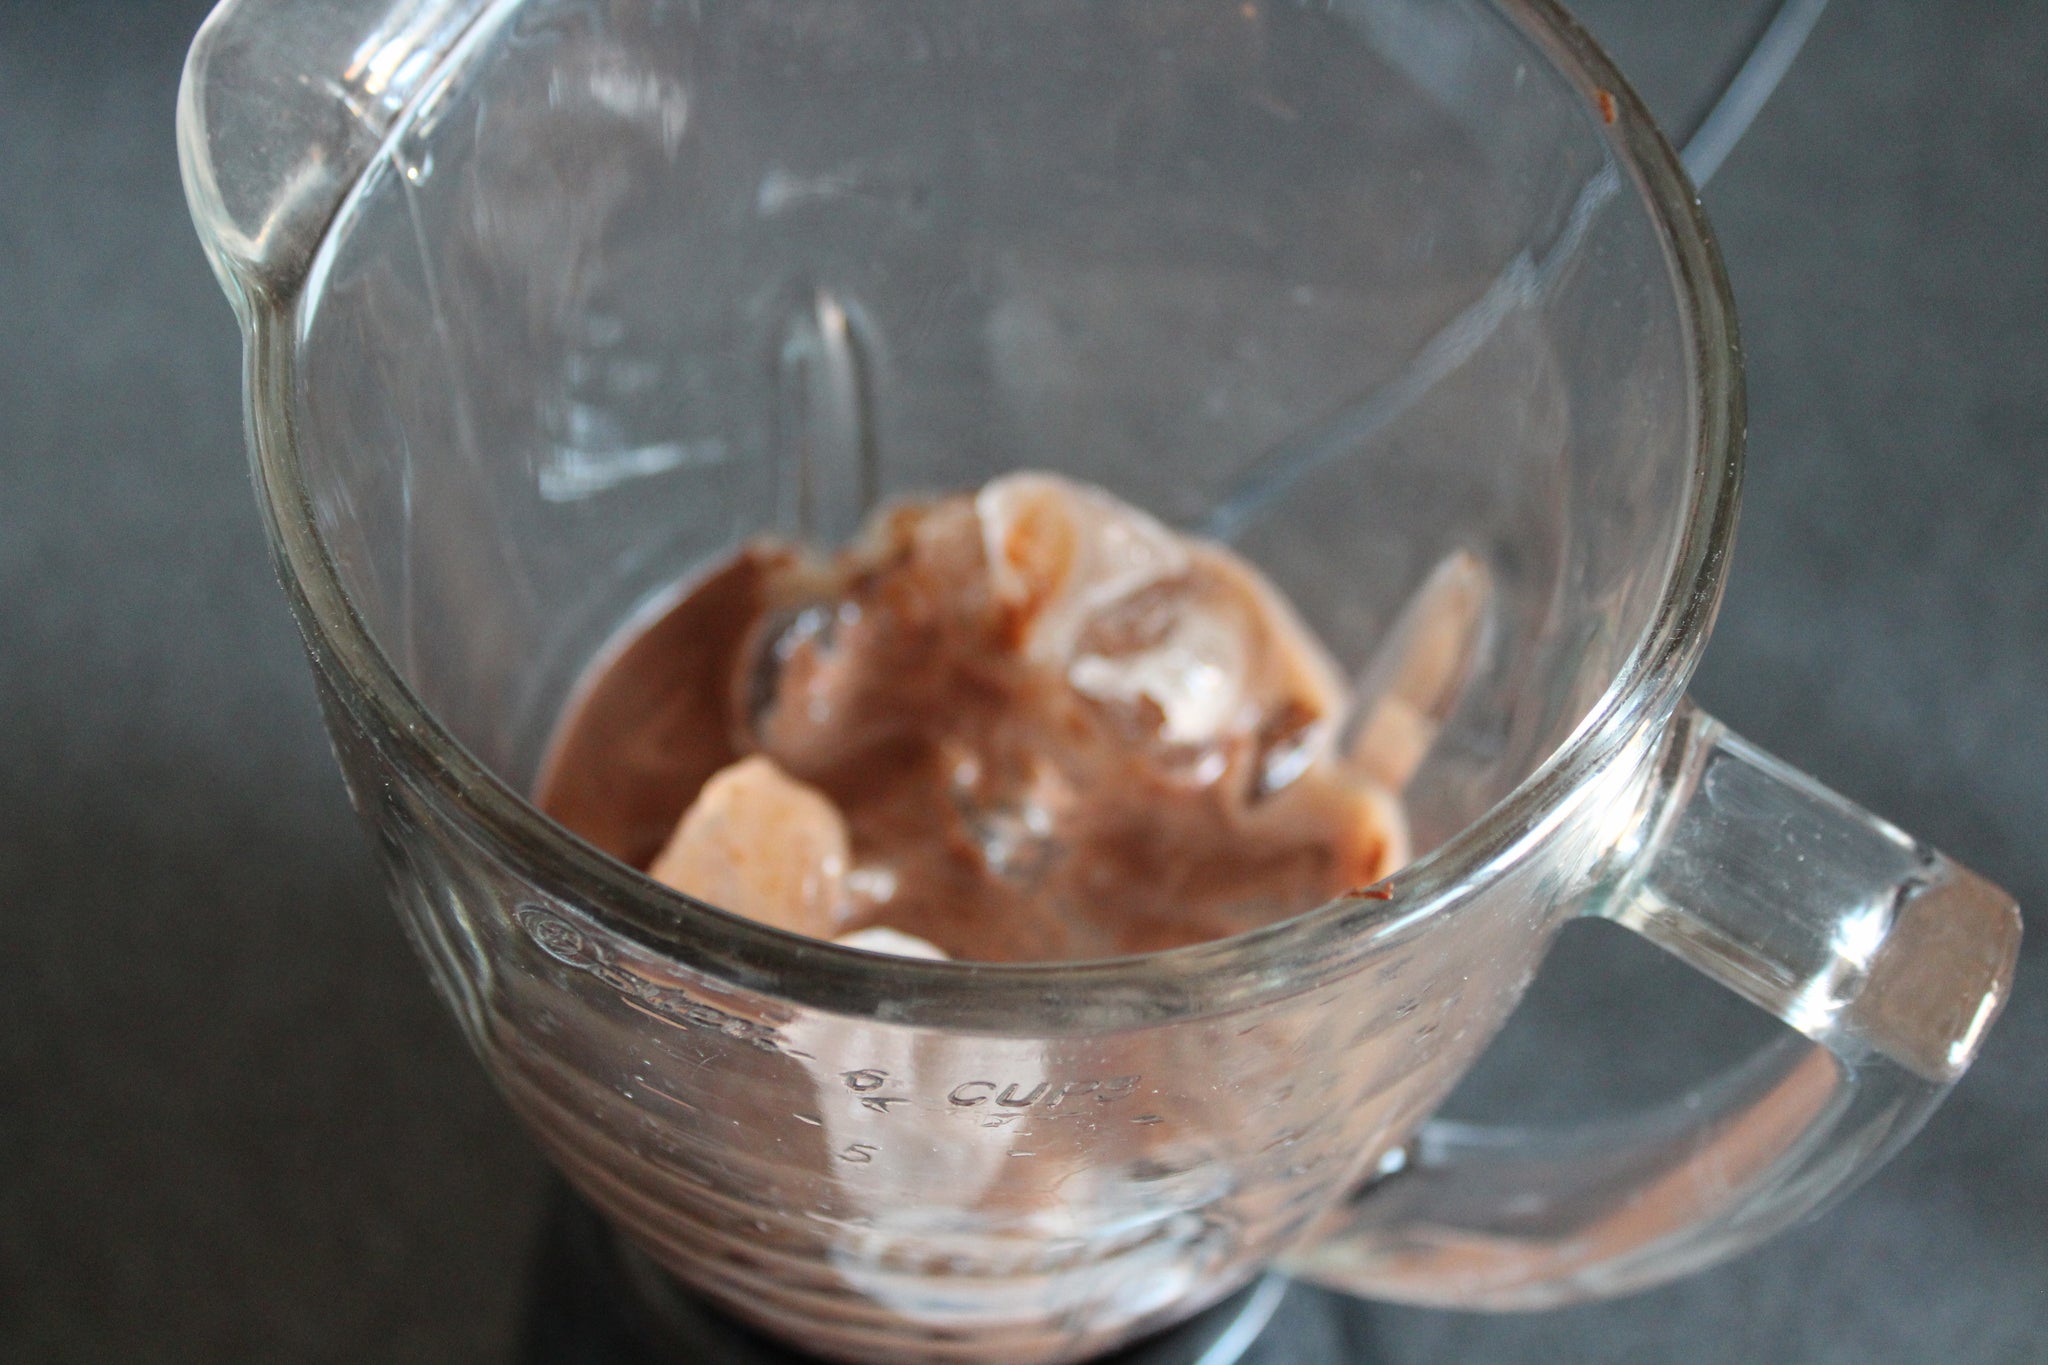 Add mixture to blender with ice and mix 